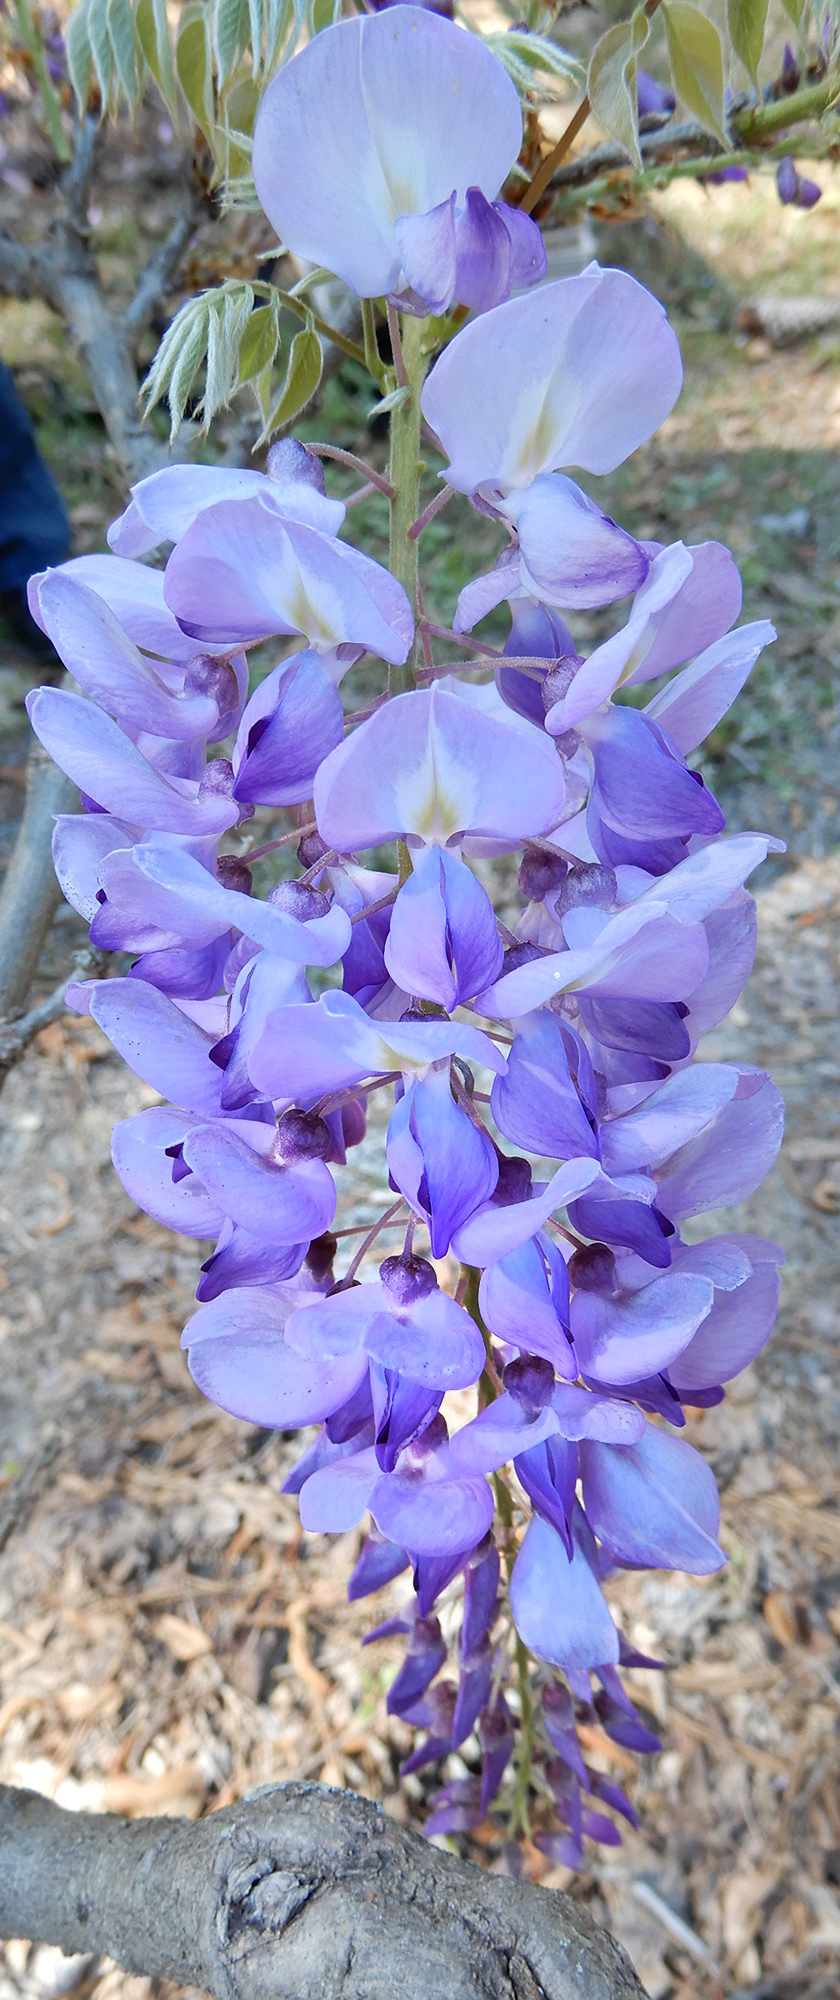 Chinese wisteria flower cluster